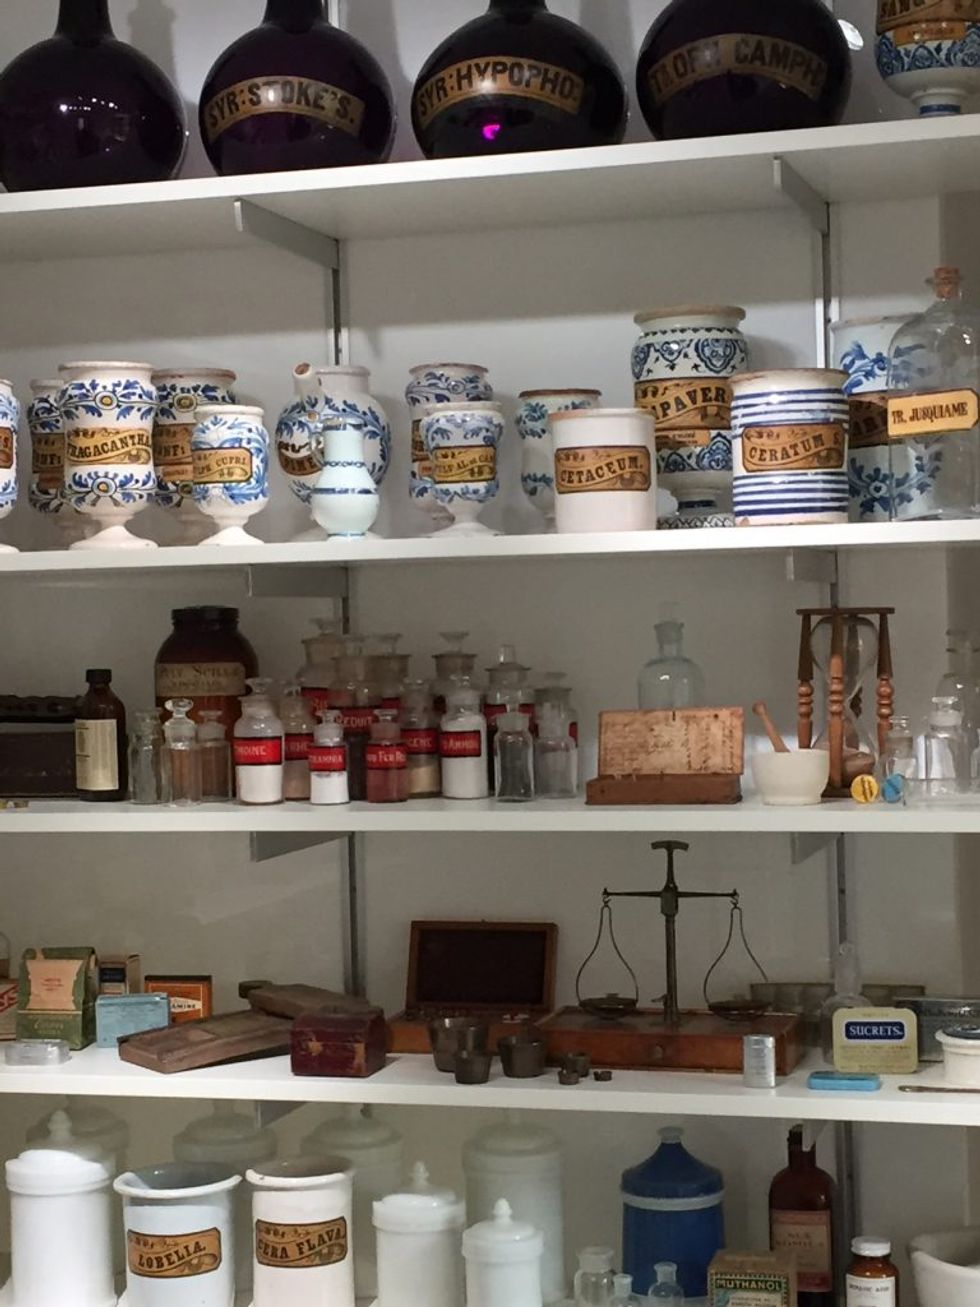 The museum includes artifacts from the old apothecary.